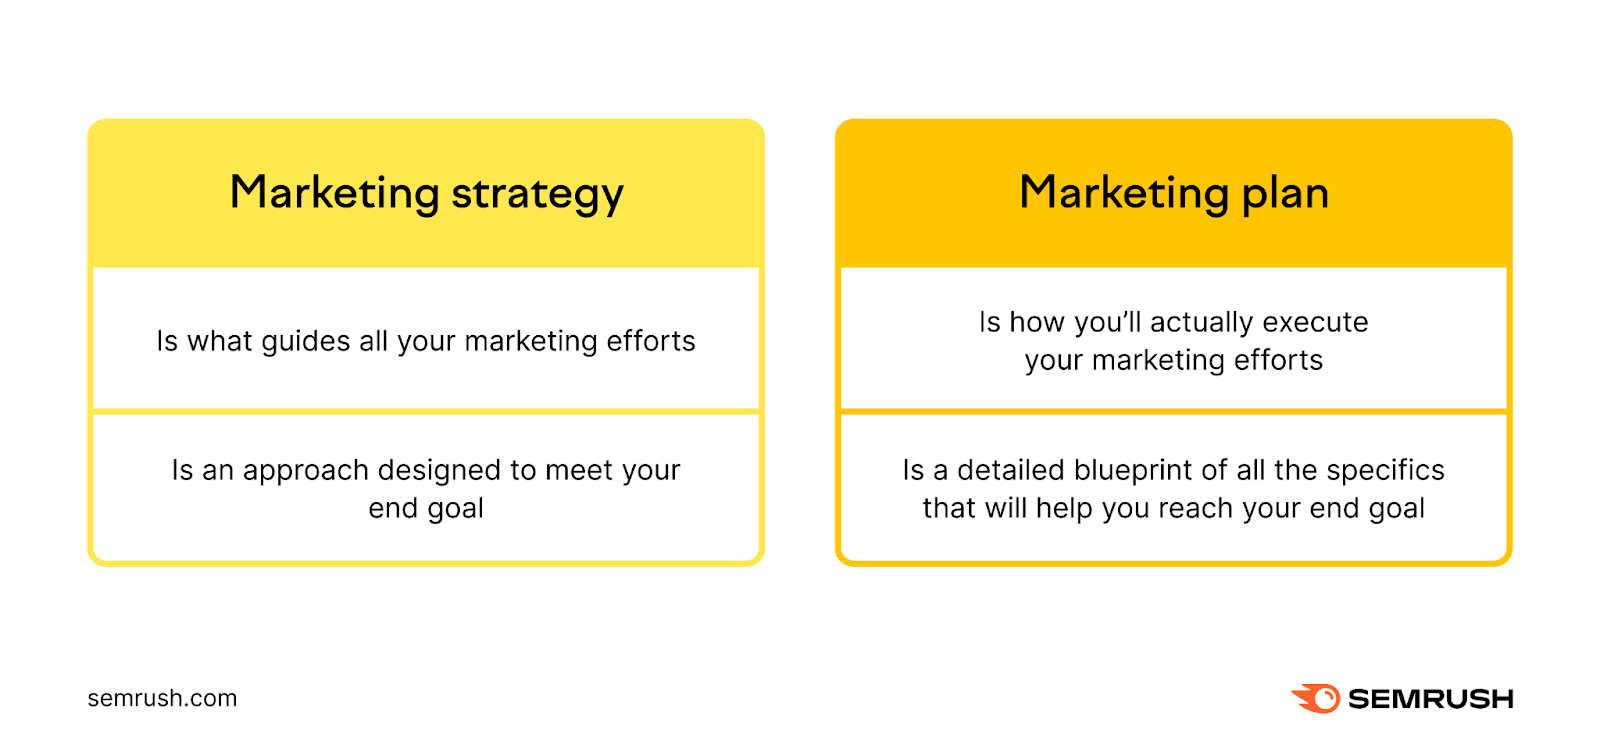 An infographic comparing marketing strategy and marketing plan definitions